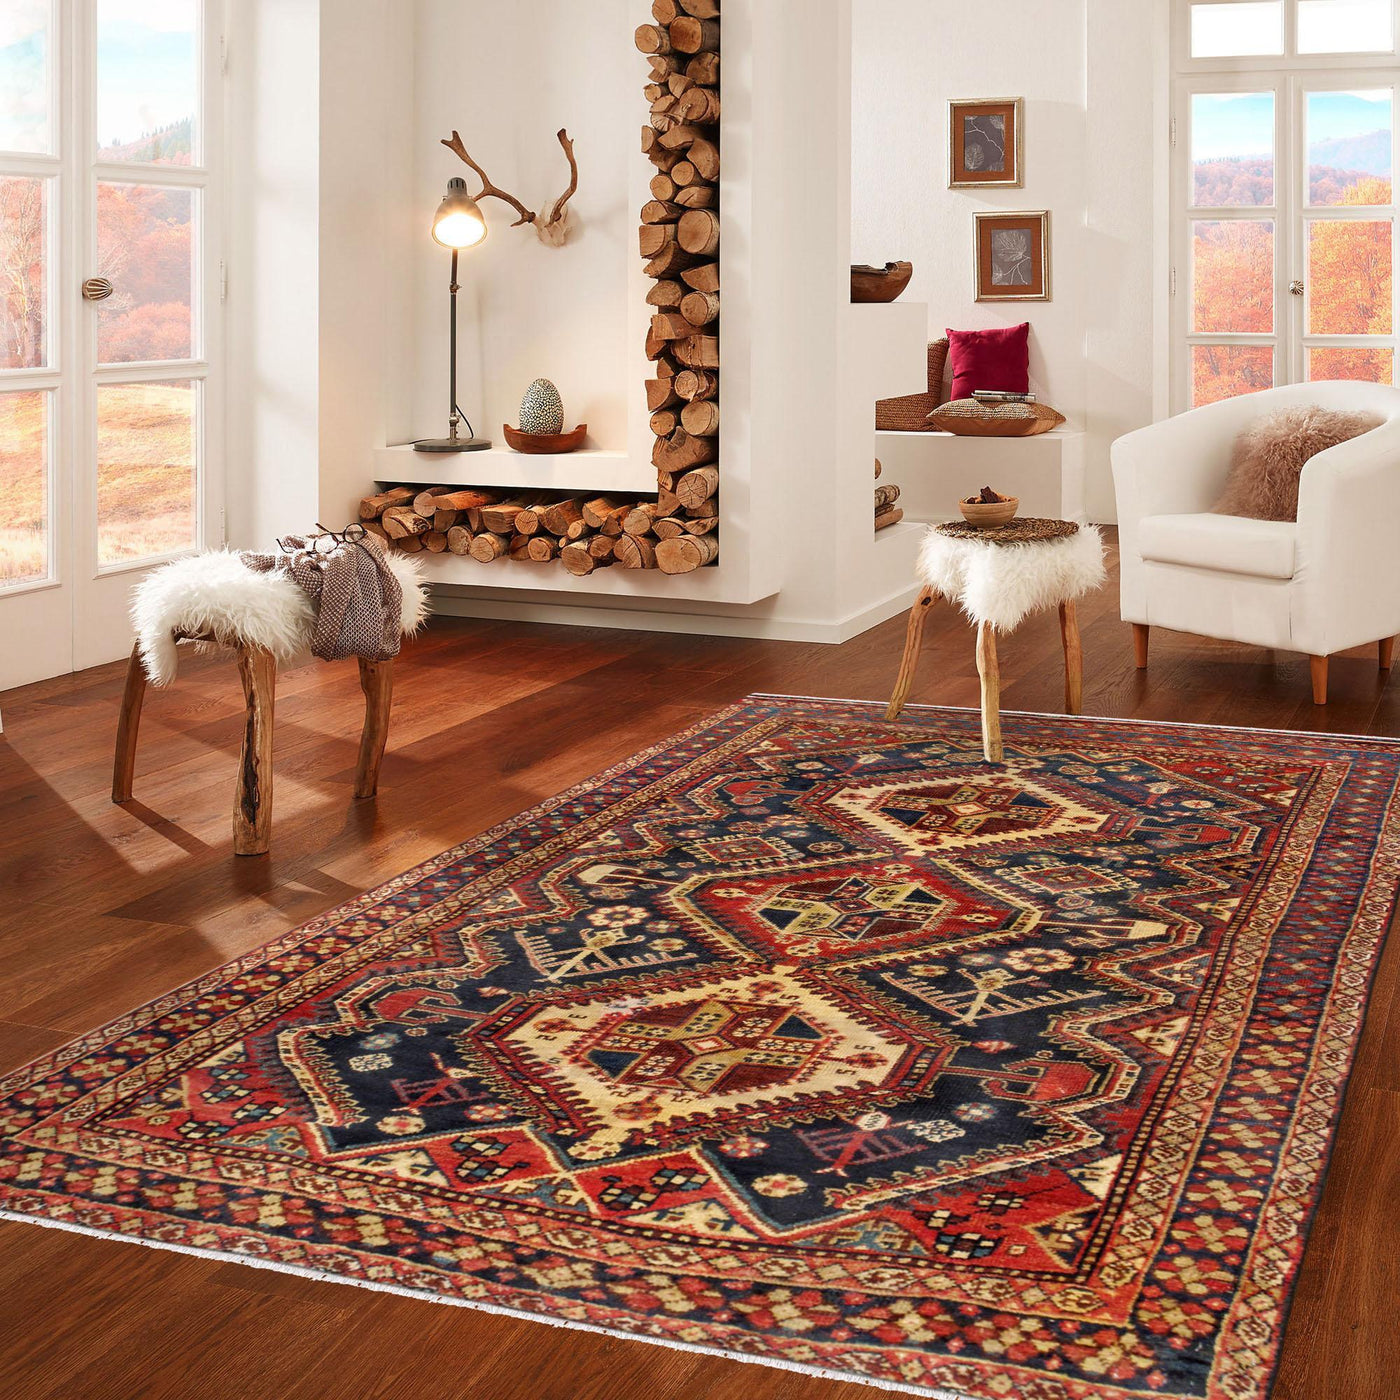 Canvello Qashgaie Small Area Rugs For Bedroom - 4'1" X 6'4"